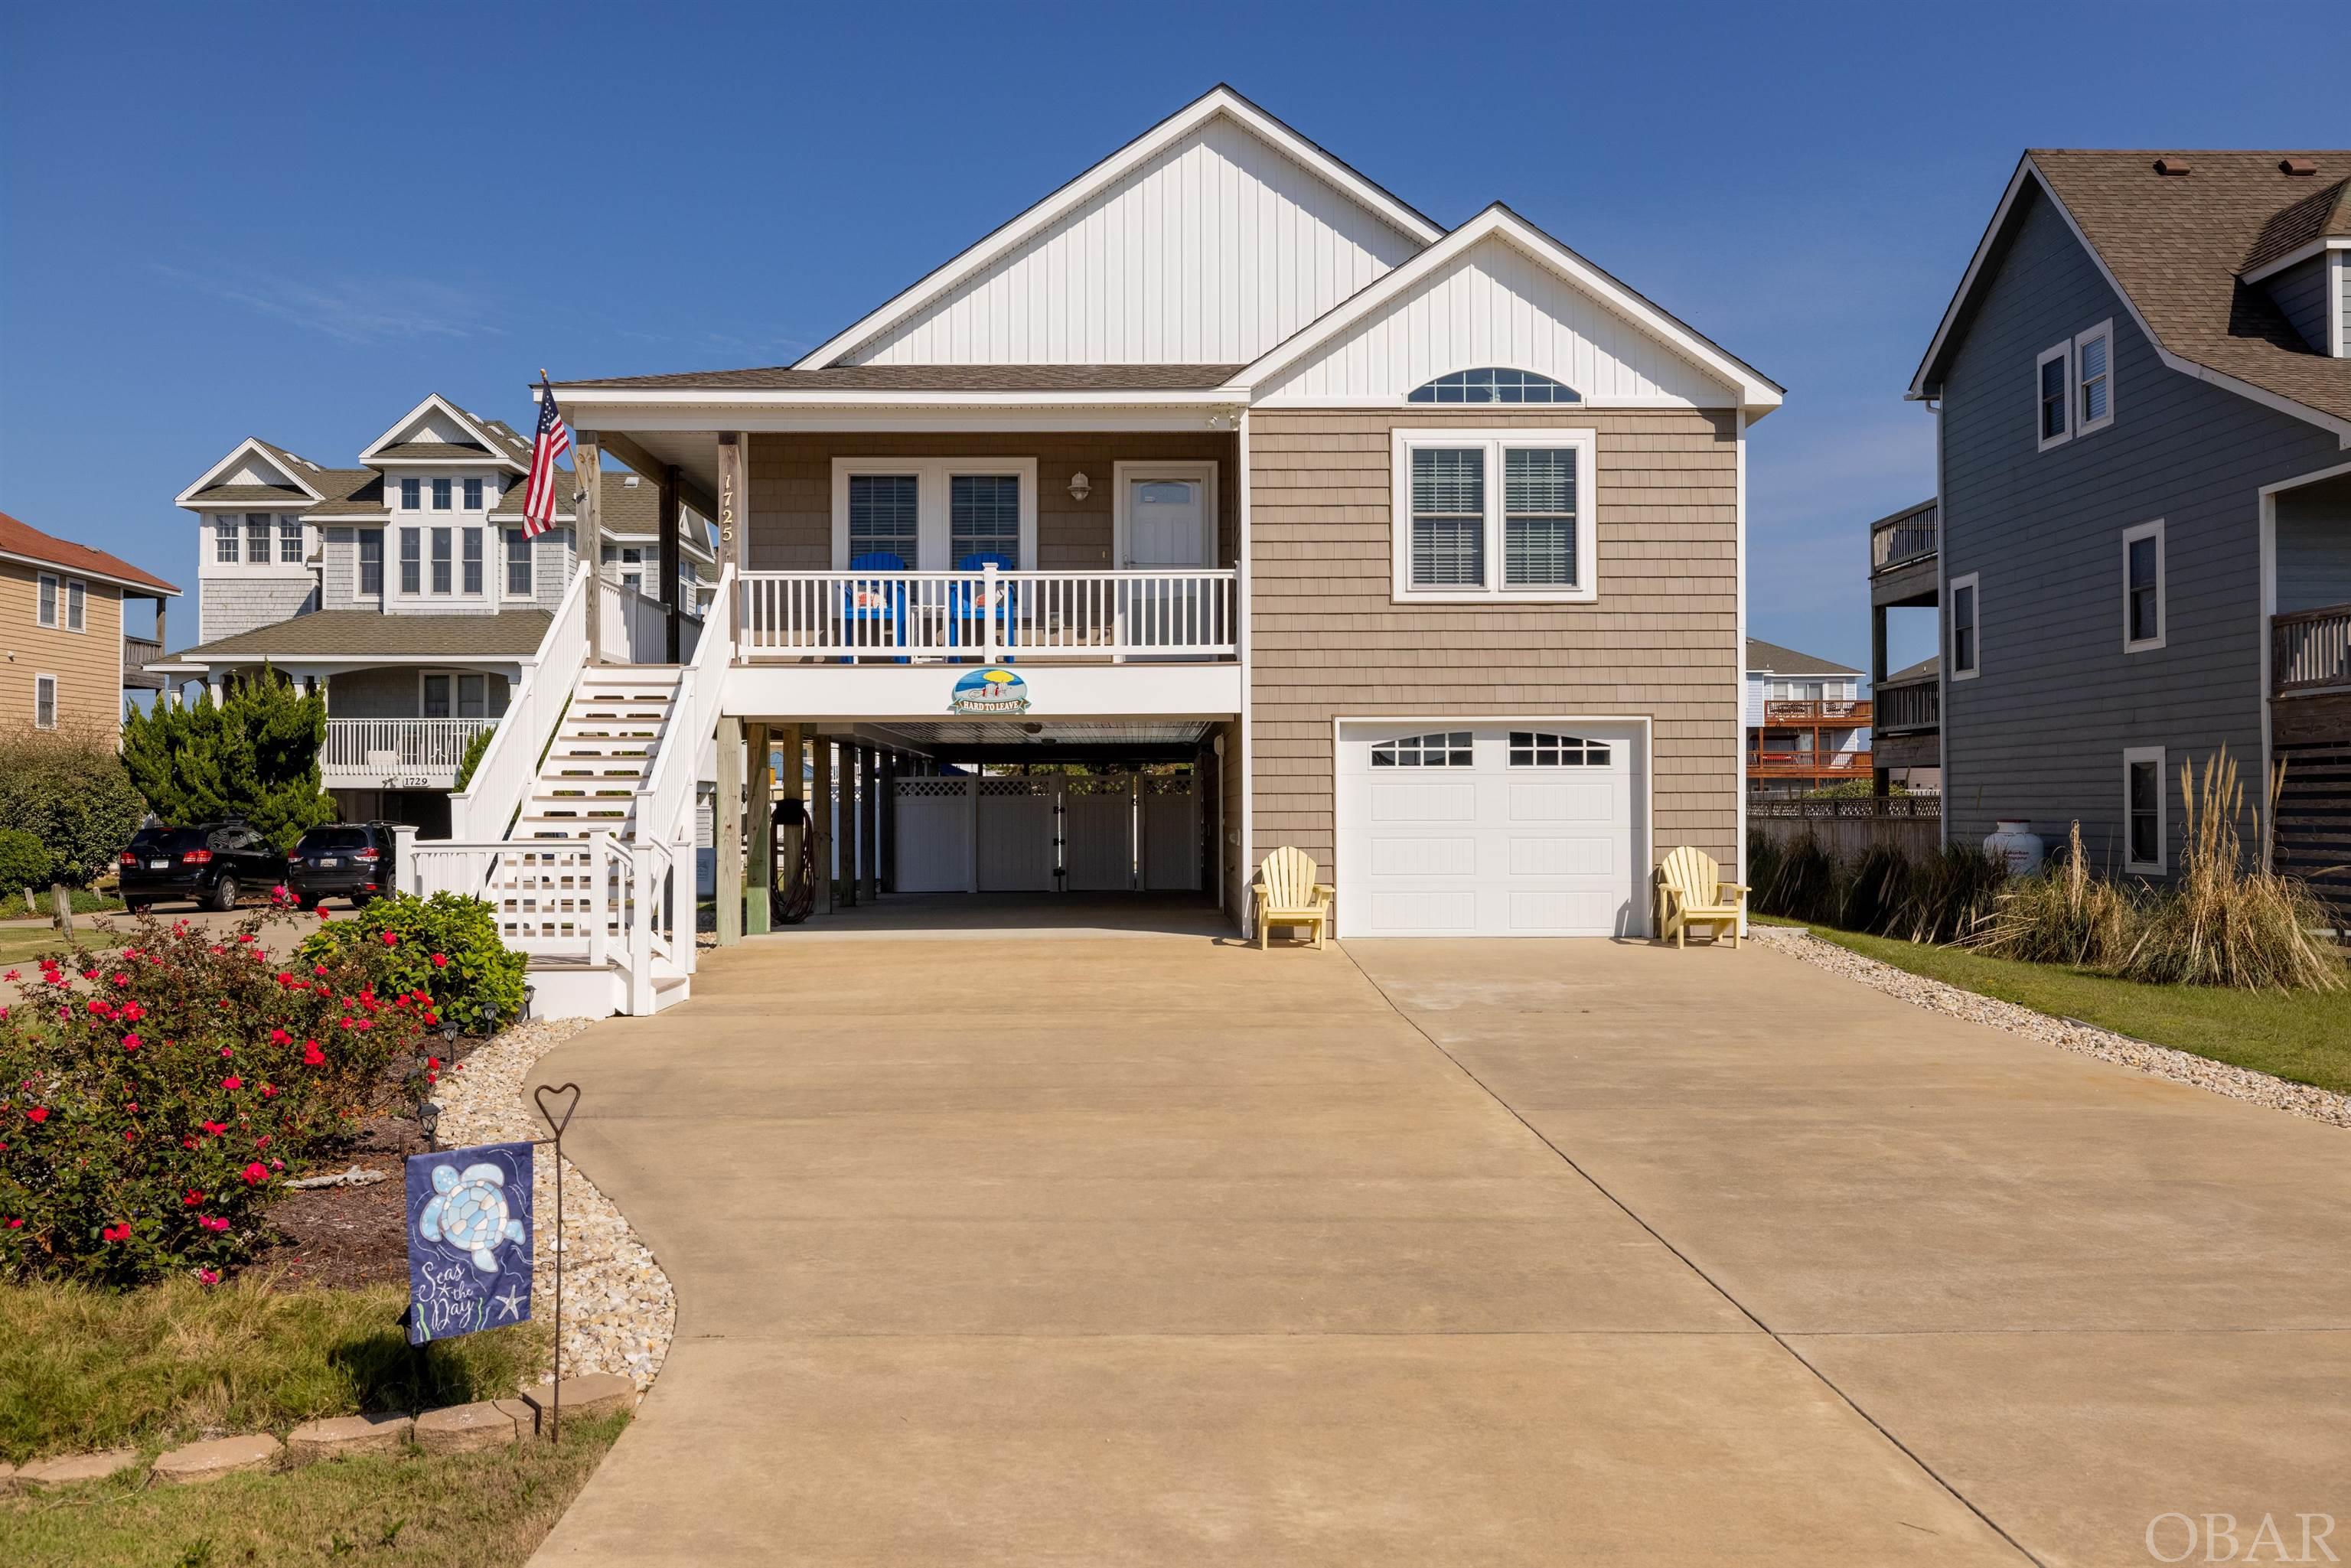 This is one of the nicest homes between the highways on the entire Outer Banks!